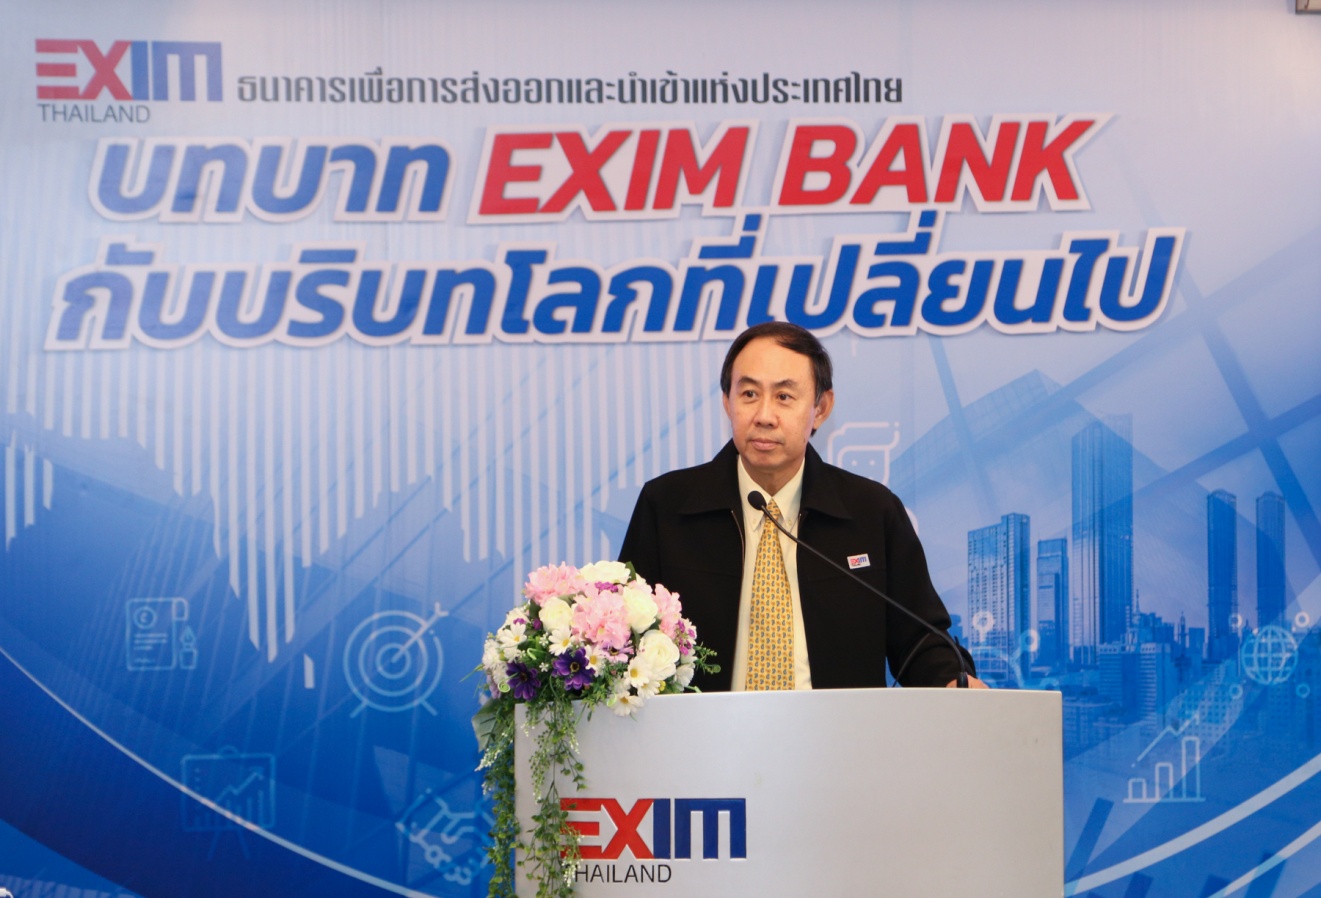 EXIM Thailand Supports Thai Entrepreneurs to Penetrate New Markets and Boost Product Innovations